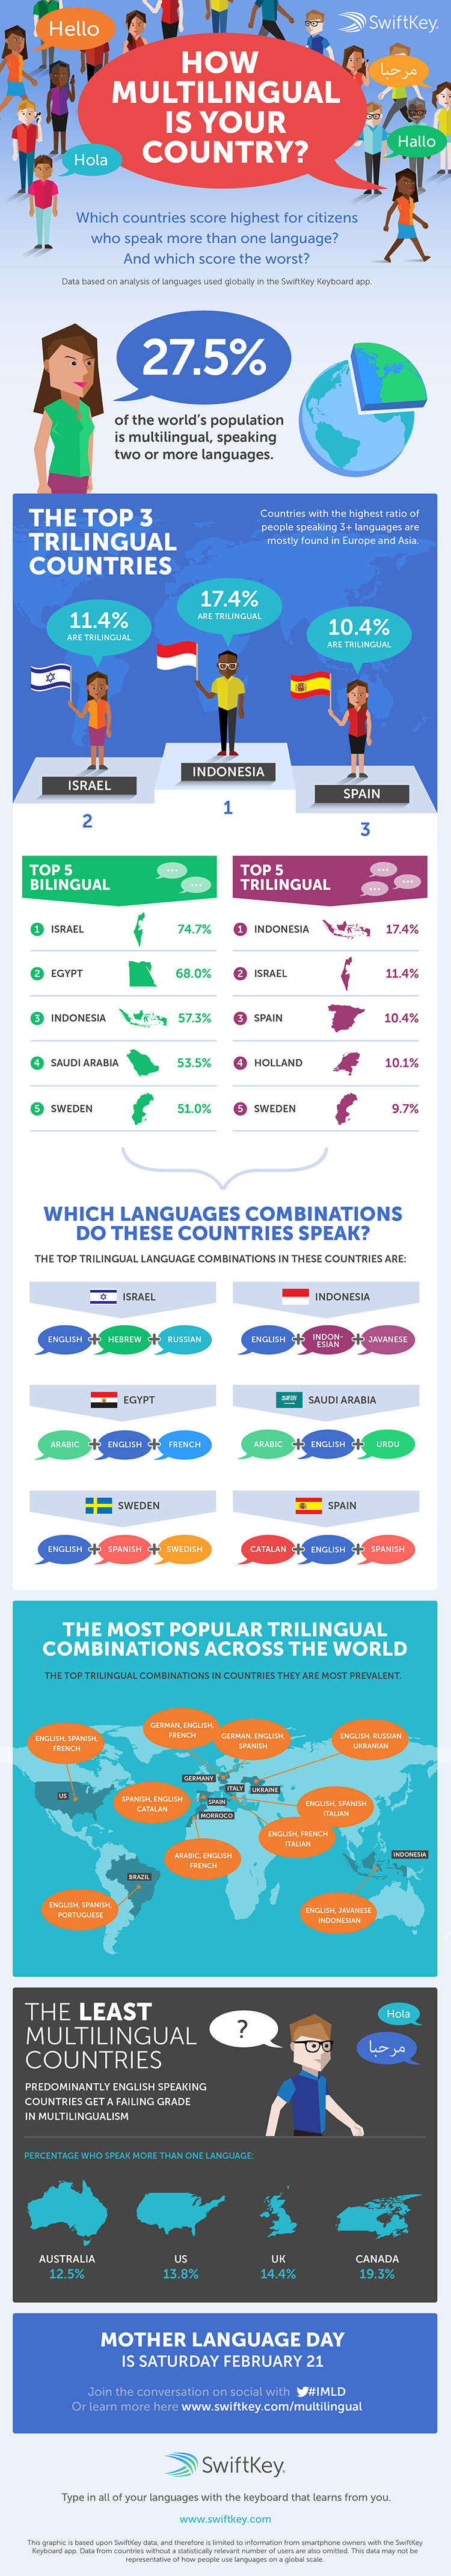 How Multilingual Is Your Country?